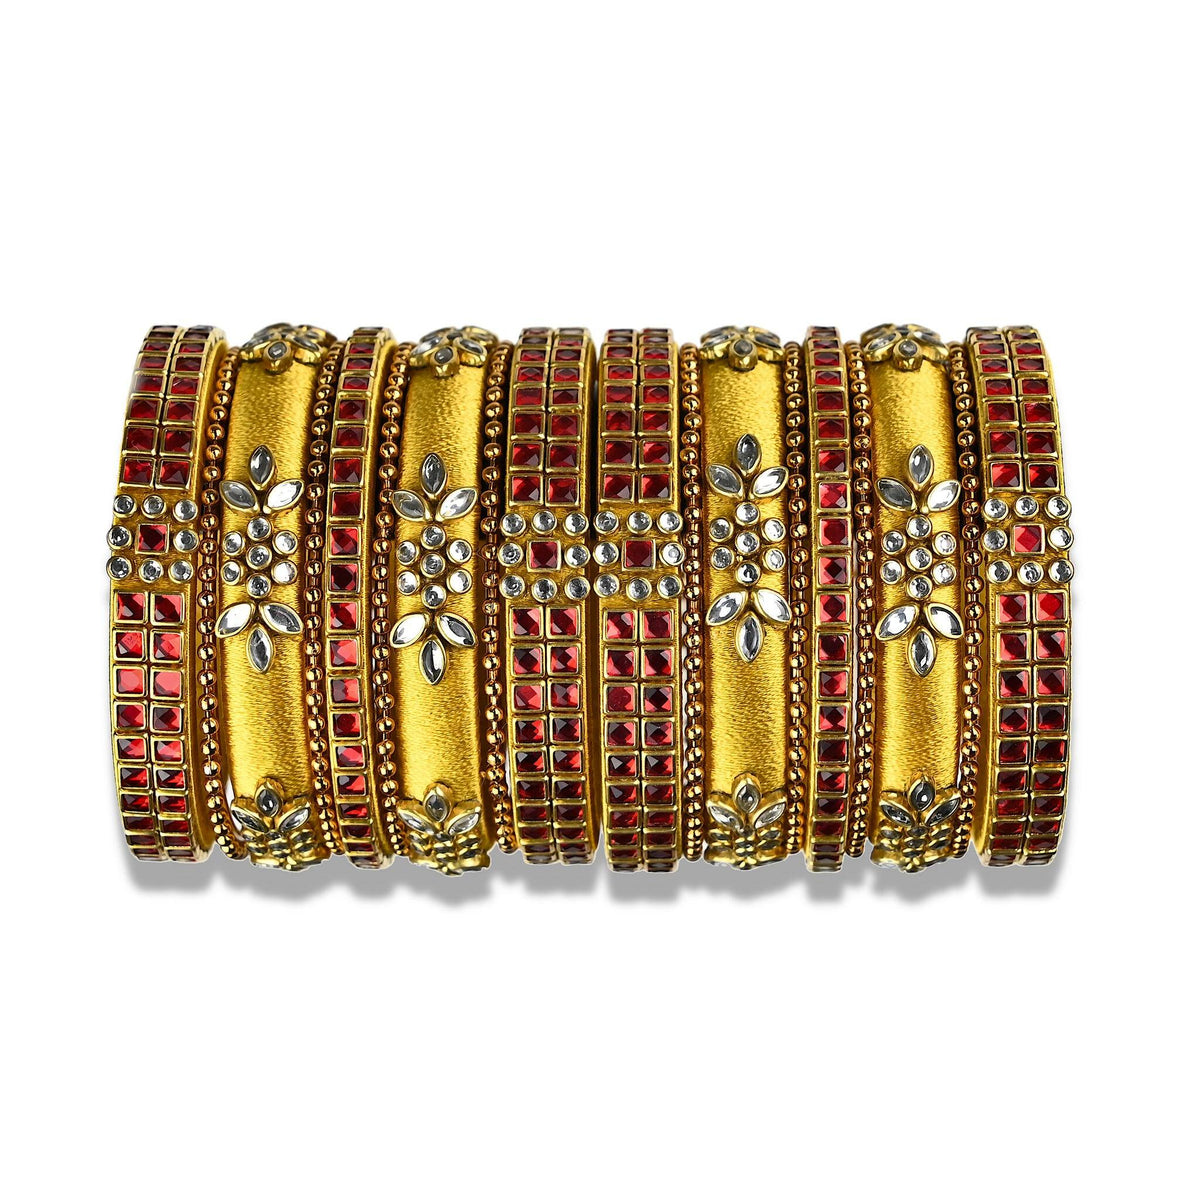 A divine set of Silk Thread Bangles beautifully ornamented with gold silk thread and ruby red kundan stone bezels. The bangles comes in a set of 18 with 9 for each hand.